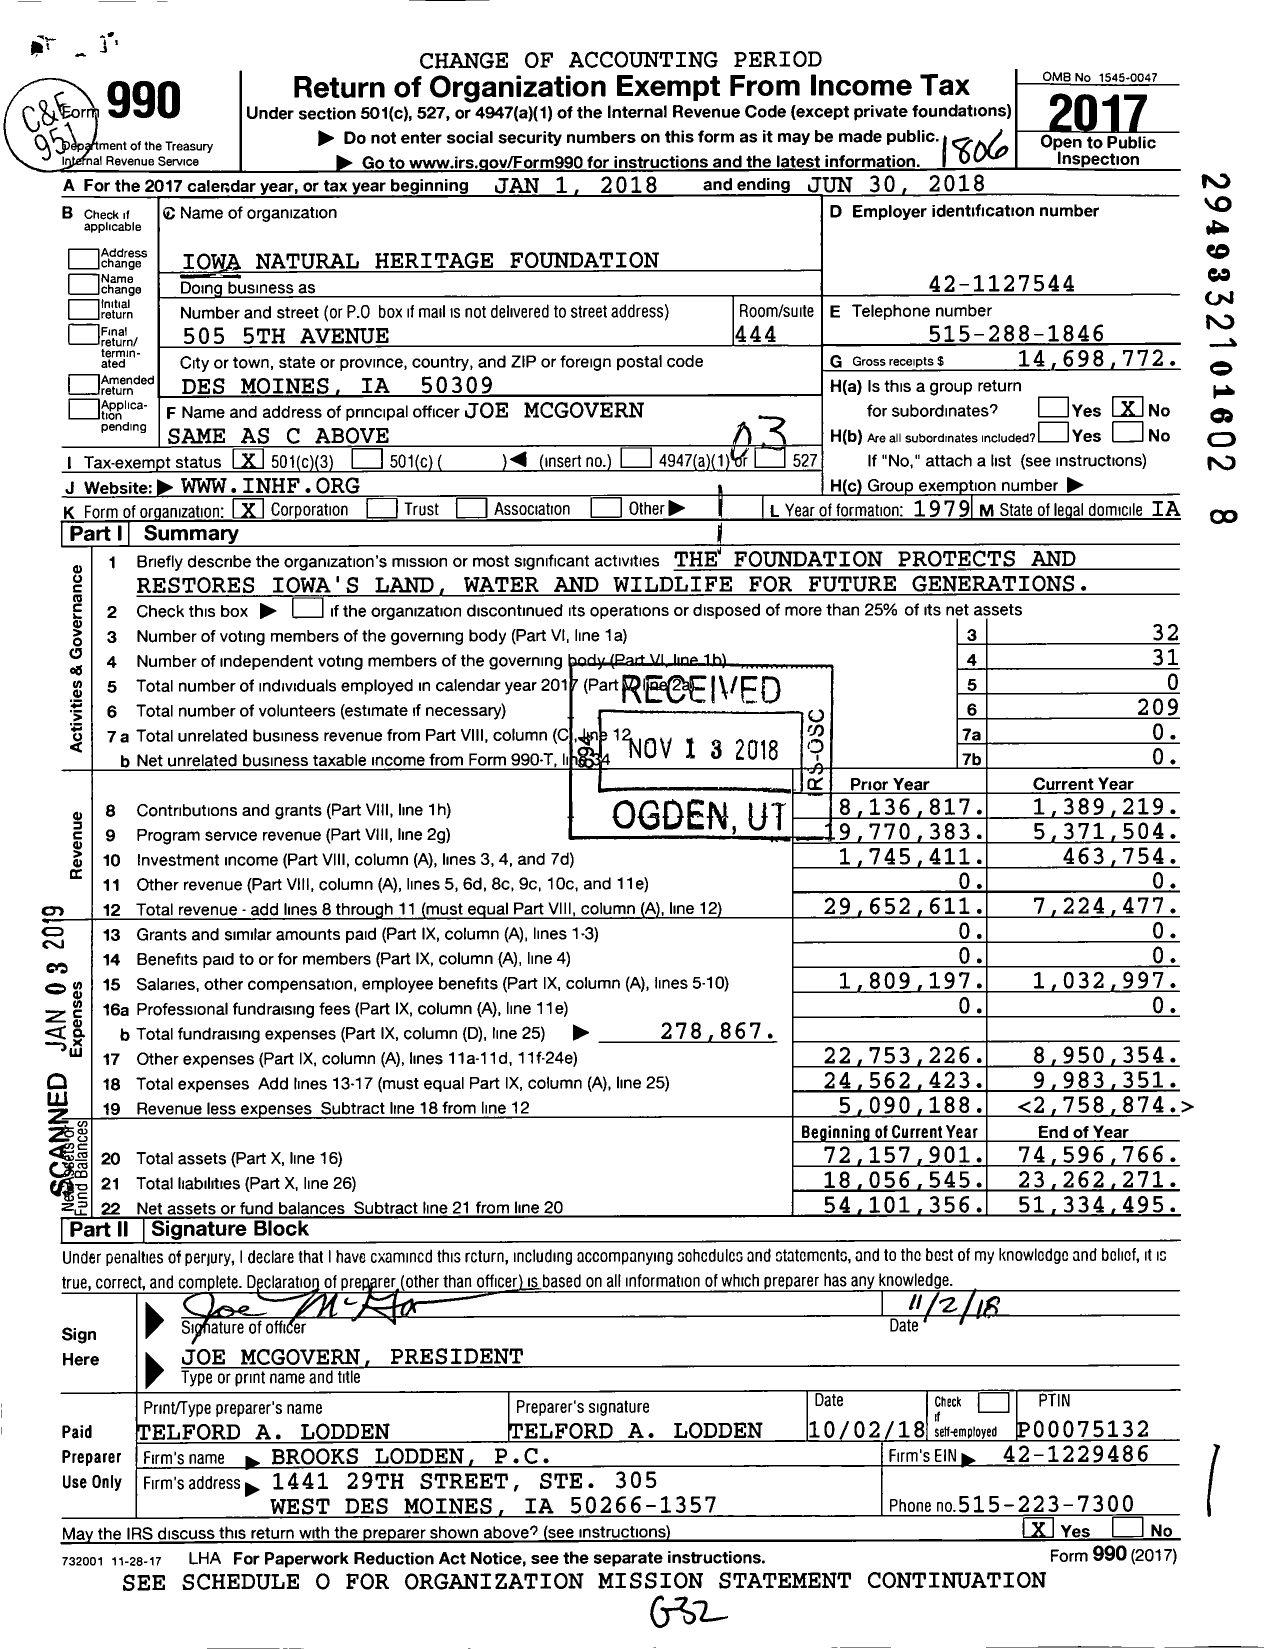 Image of first page of 2017 Form 990 for Iowa Natural Heritage Foundation (INHF)